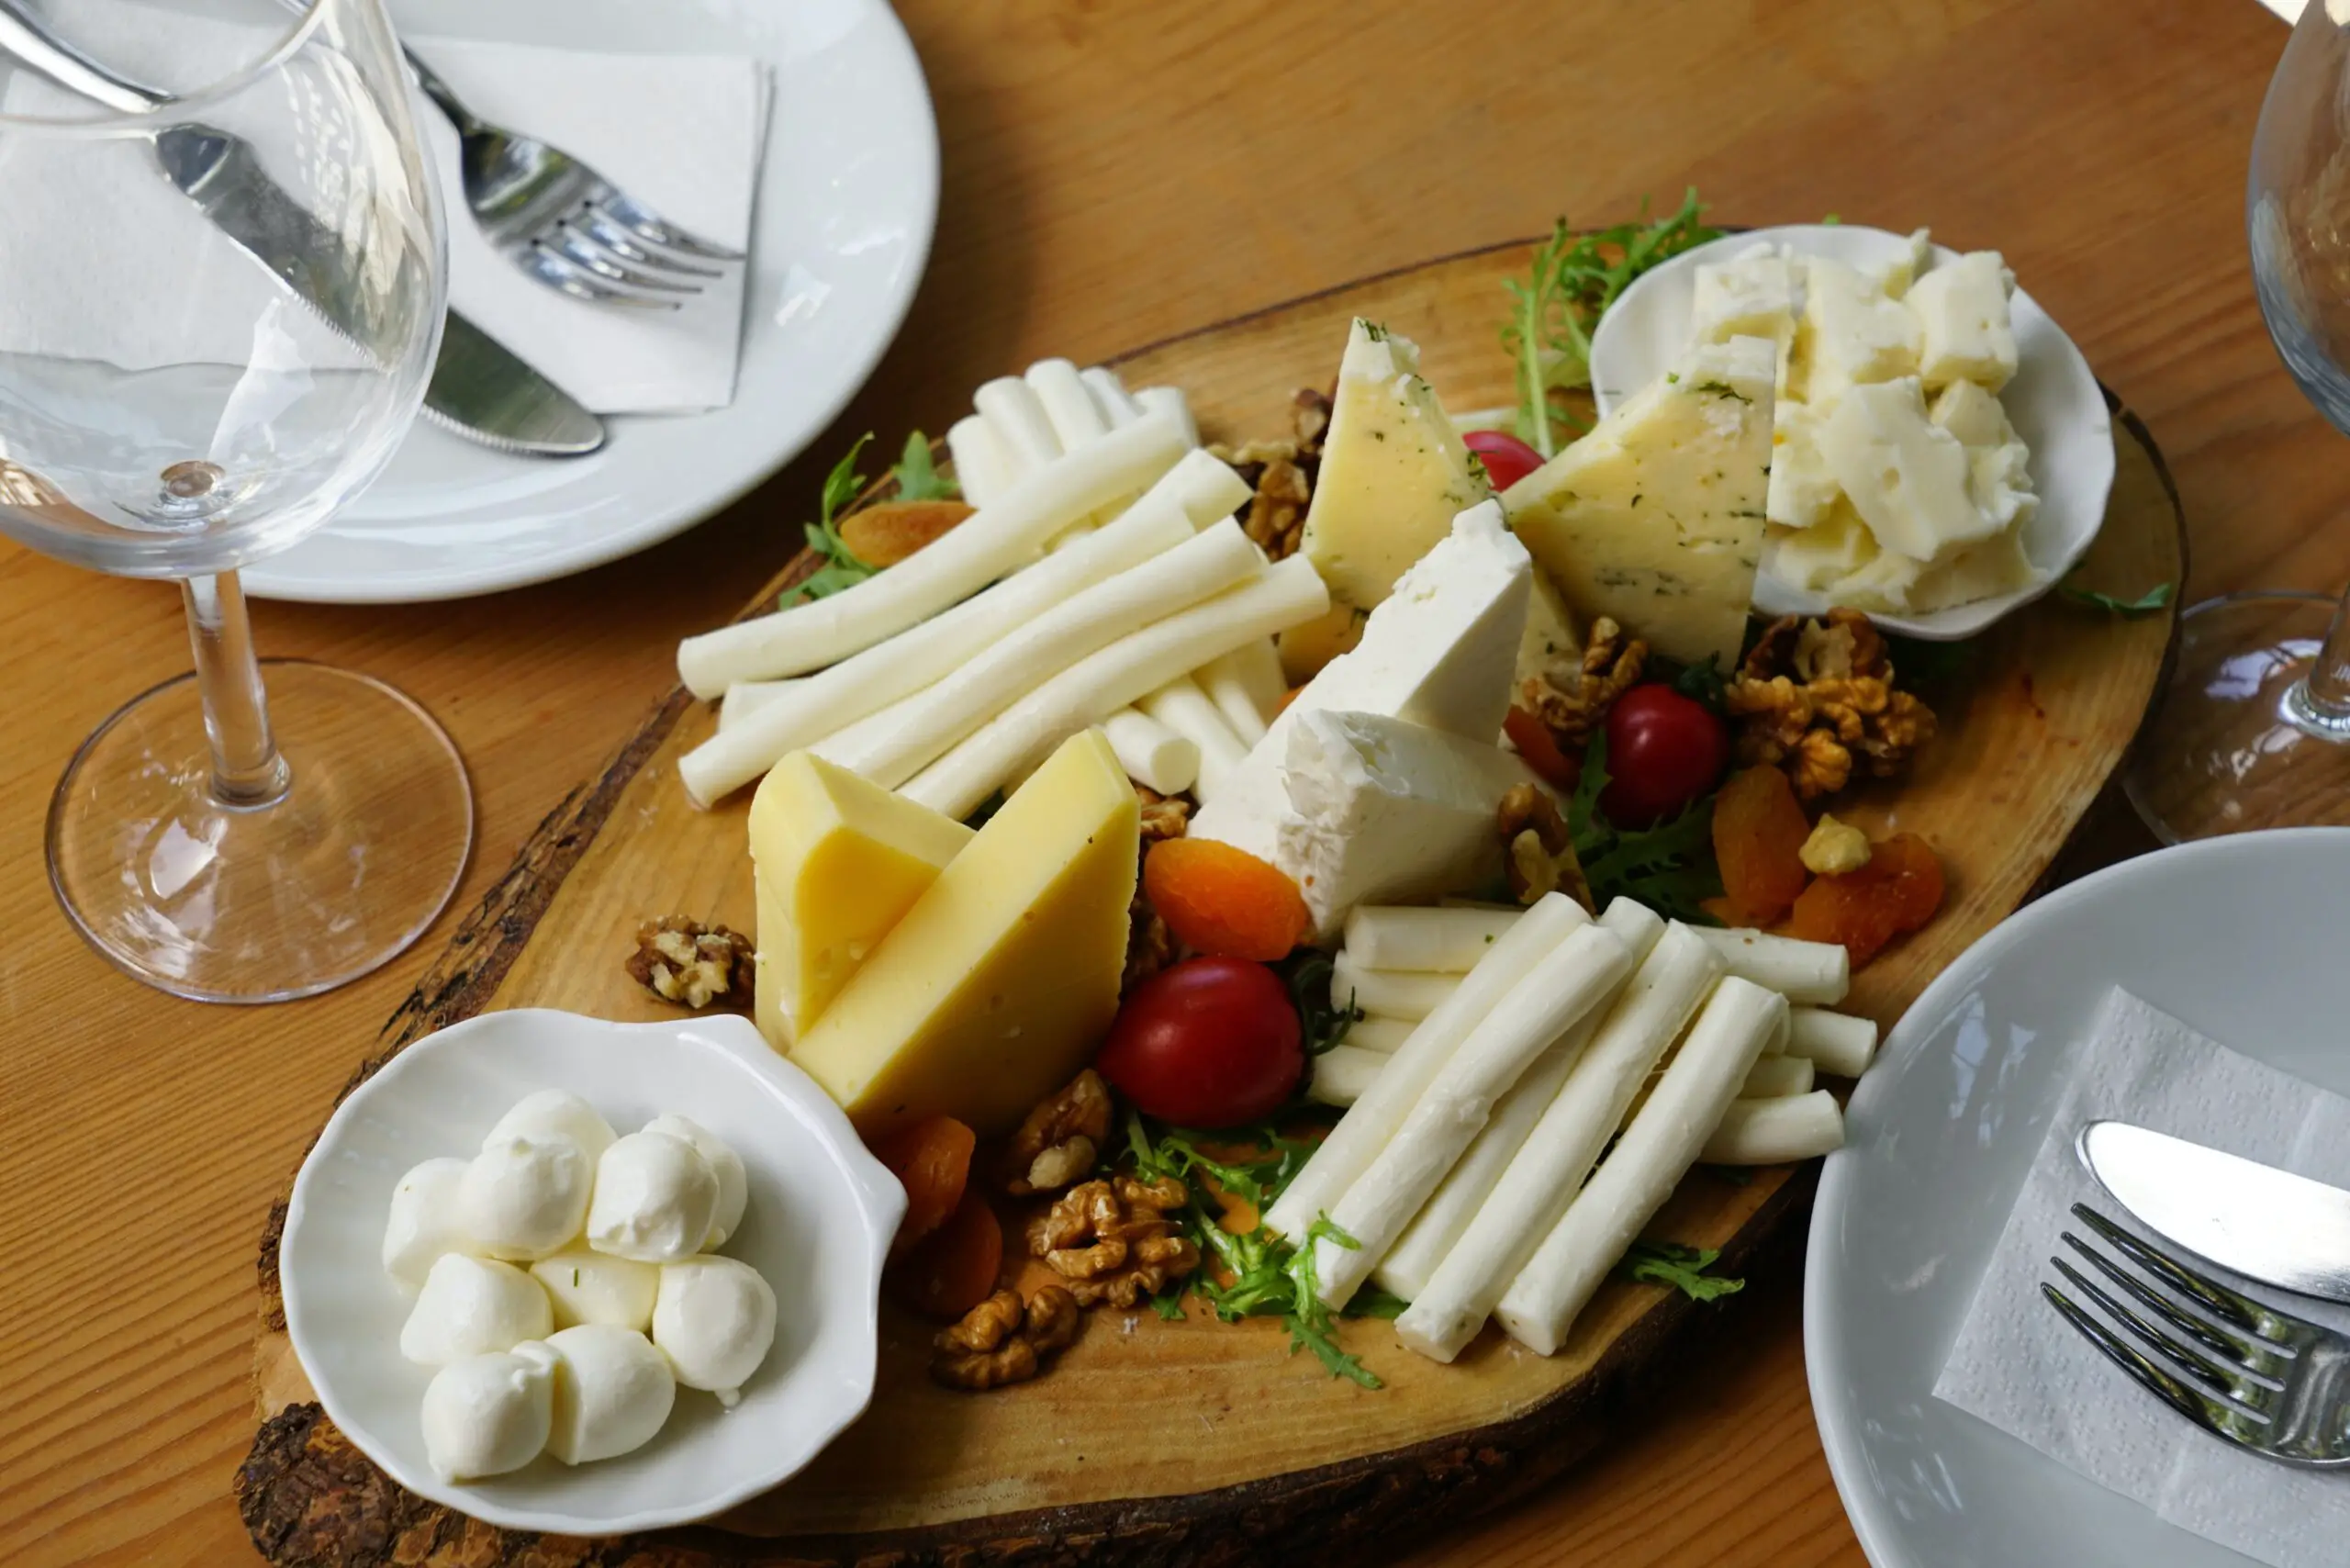 Is Cheese Good For Weight Loss Or Fattening?